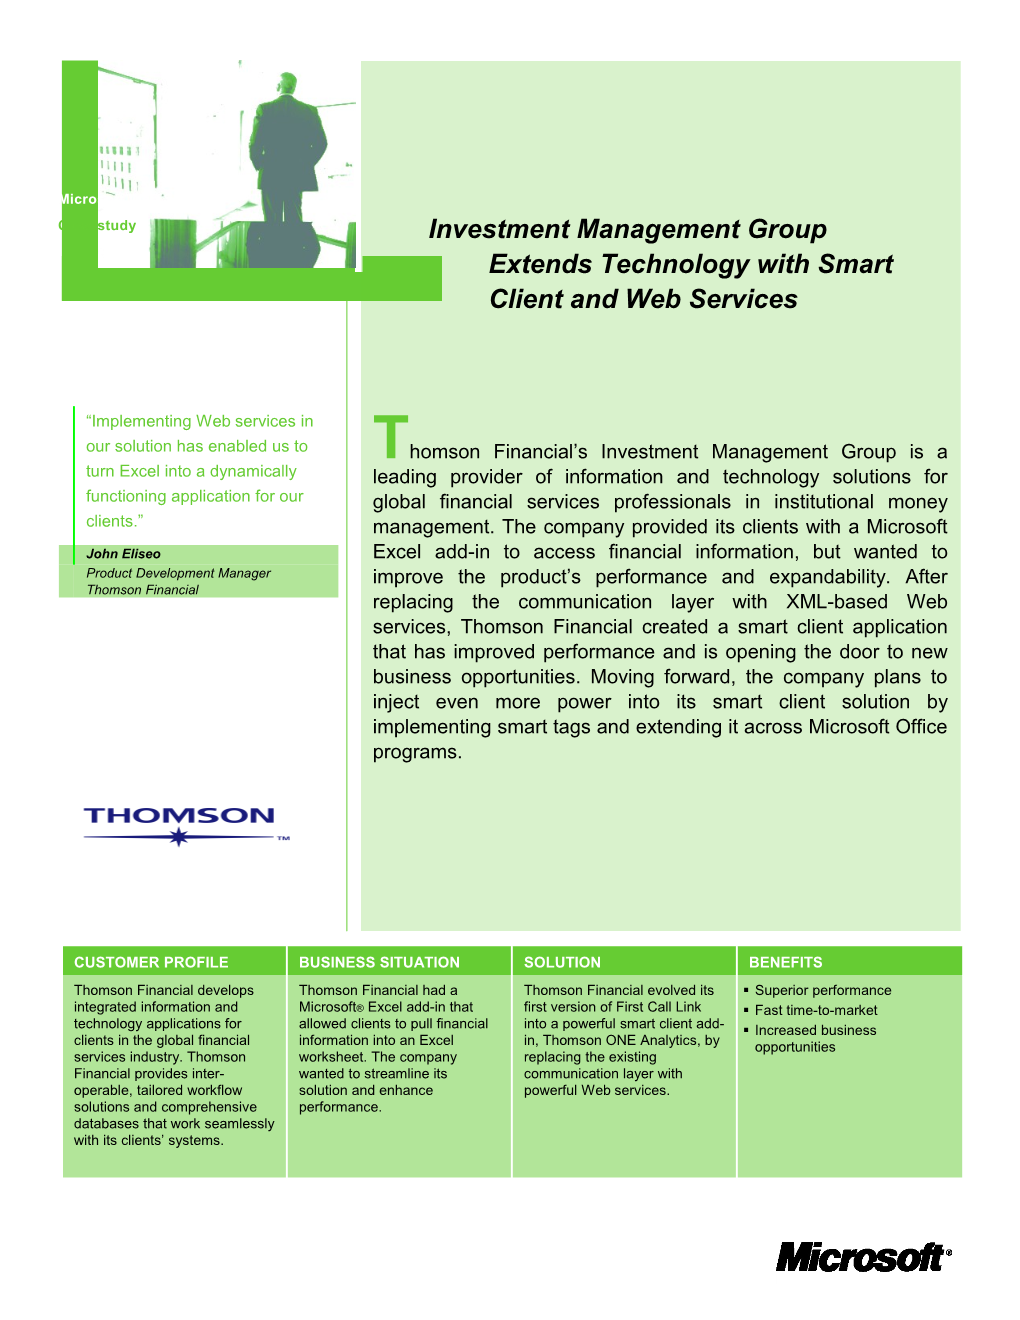 Investment Management Group Extends Technology with Smart Client and Web Services